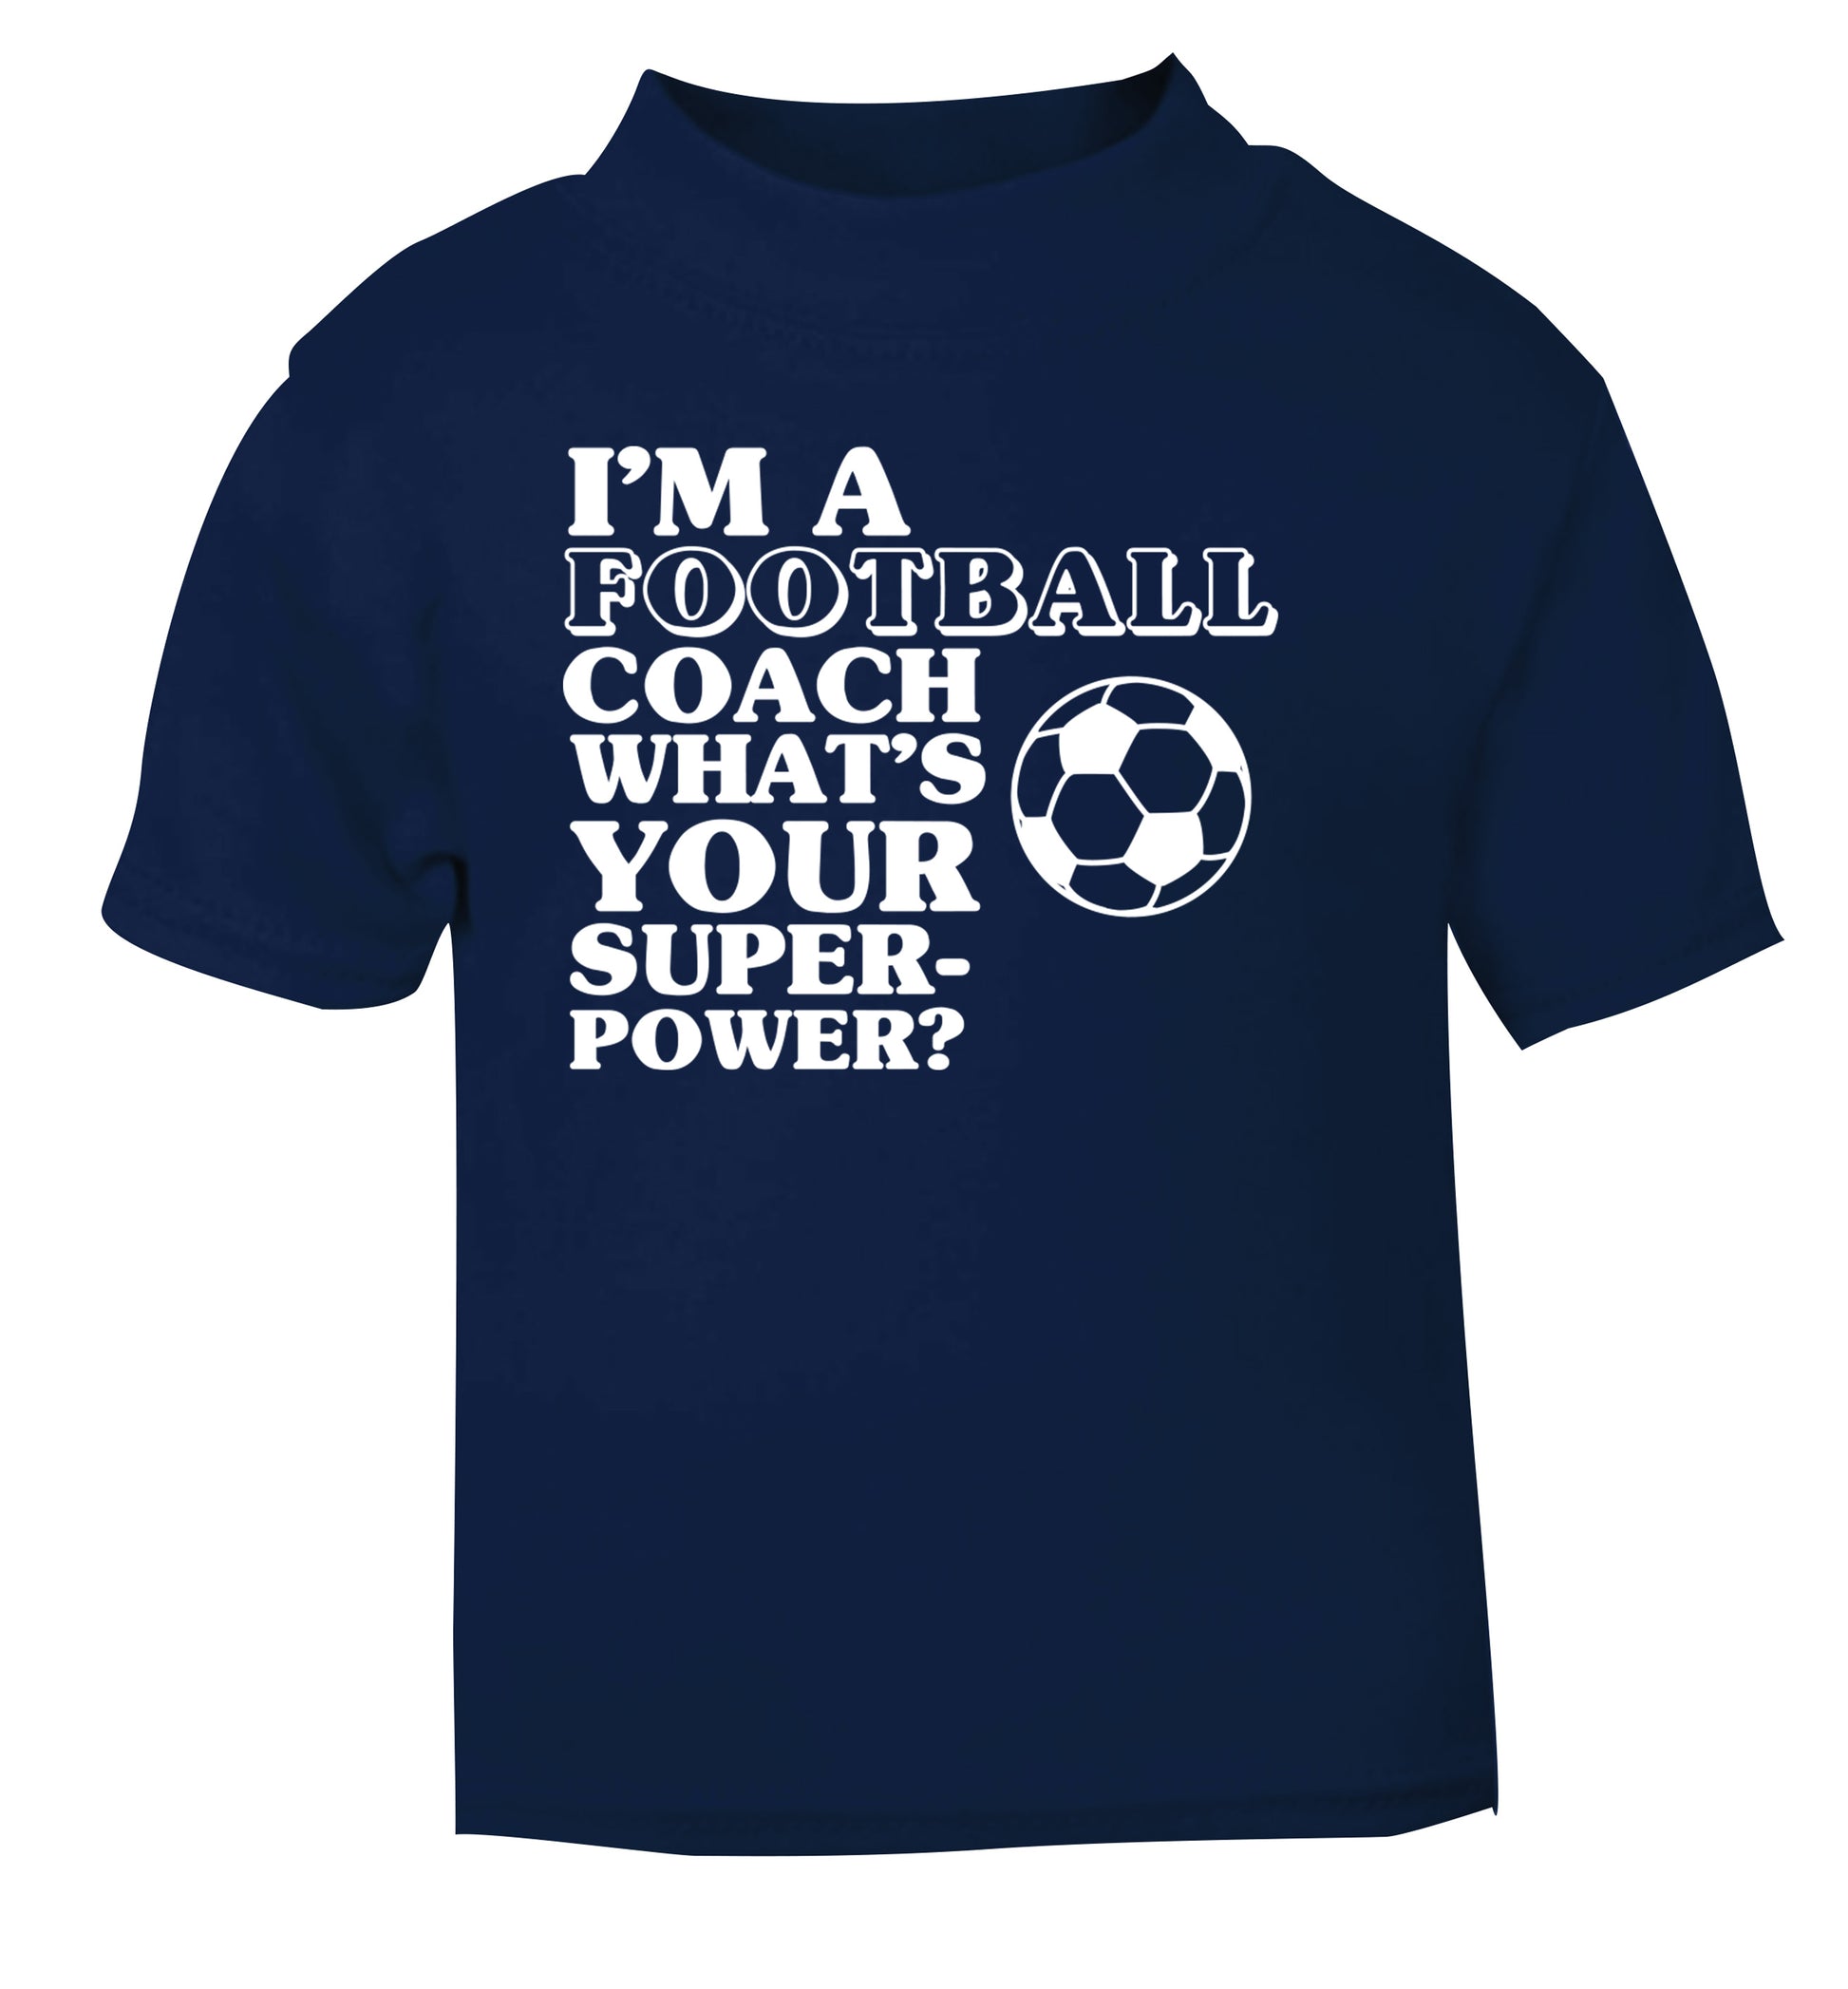 I'm a football coach what's your superpower? navy Baby Toddler Tshirt 2 Years